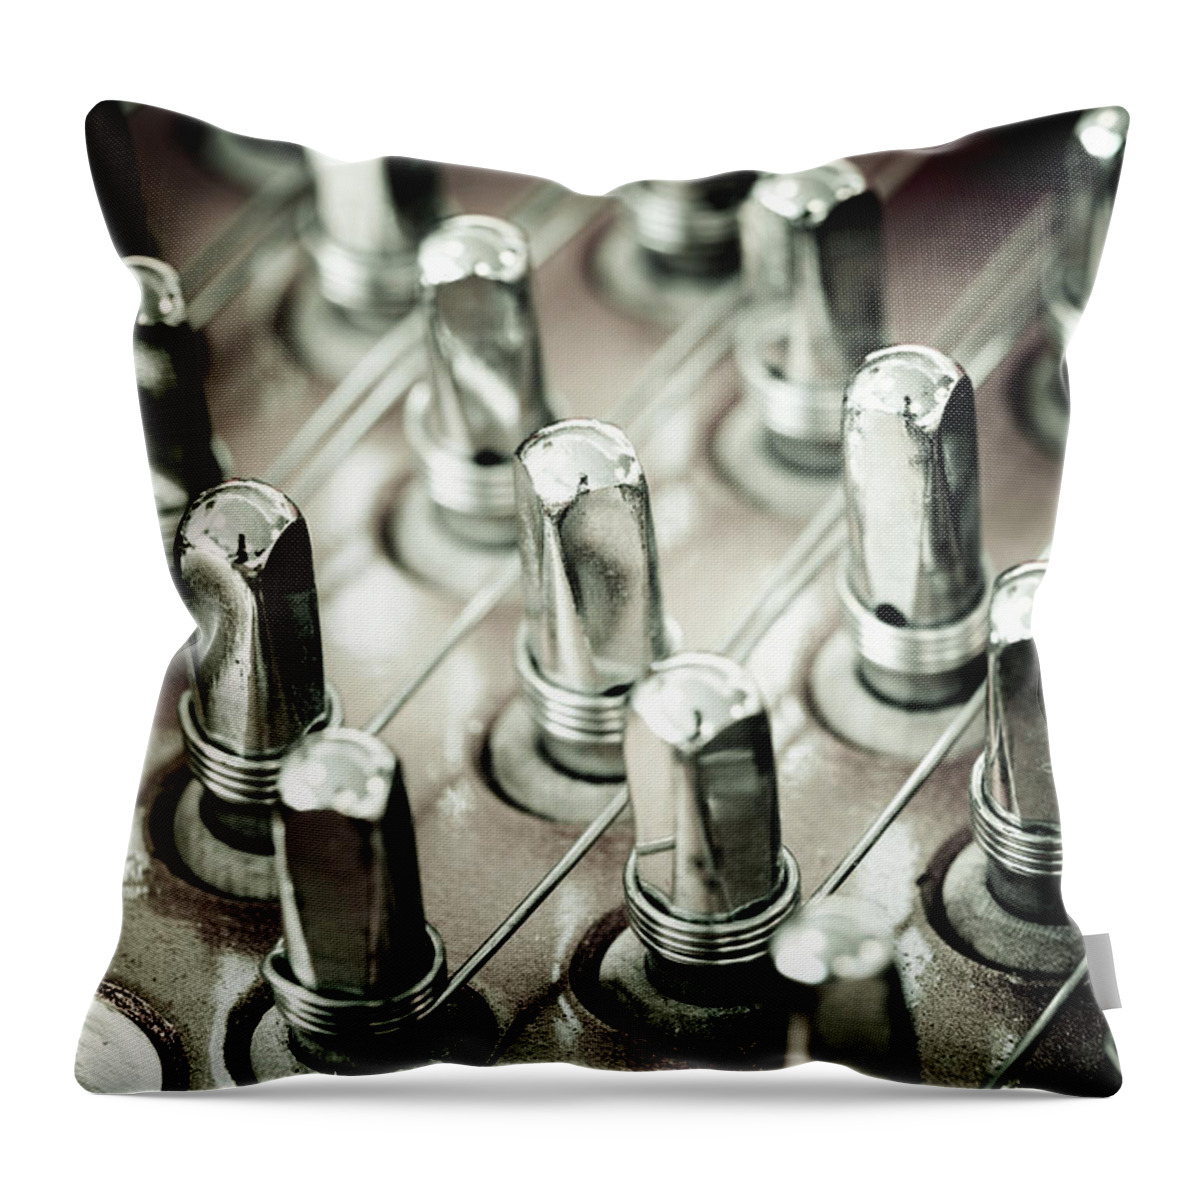 Piano Throw Pillow featuring the photograph Detail Of A Grand Piano by Abile